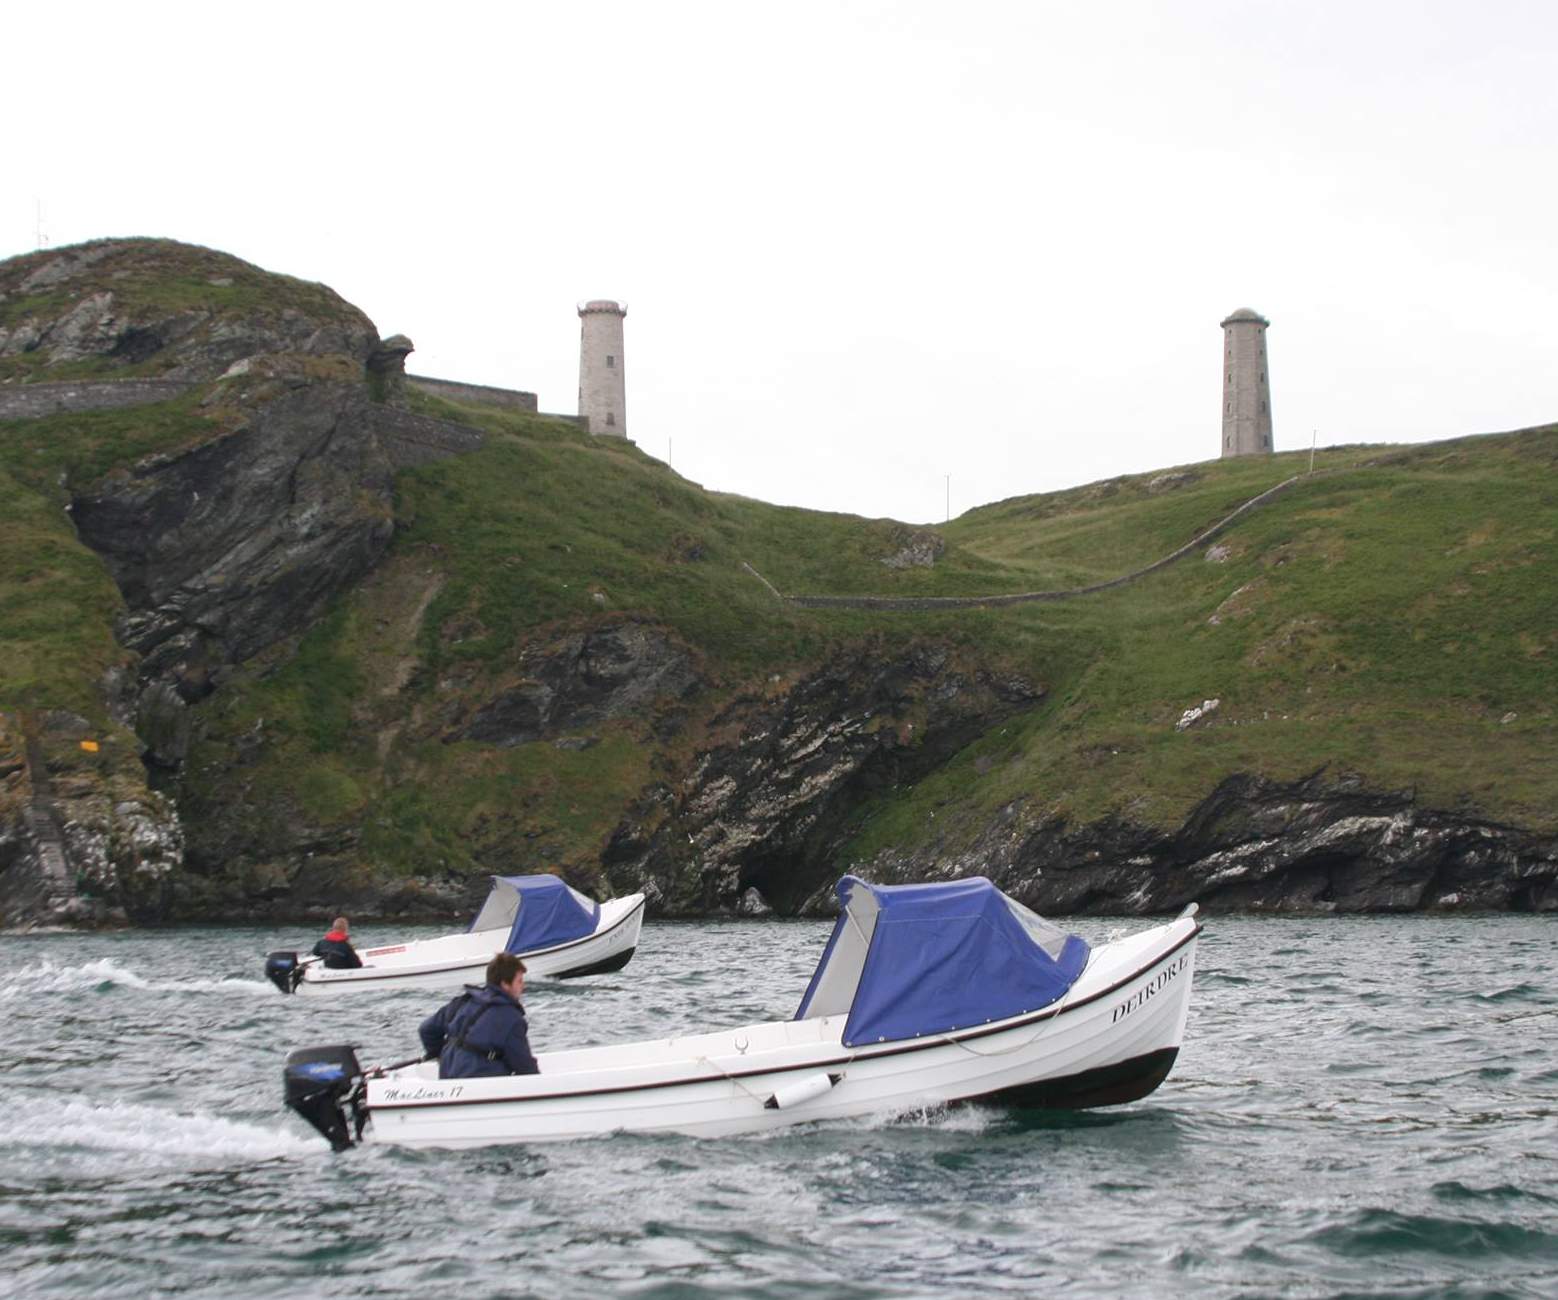 Wicklow Boat Hire - YourDaysOut